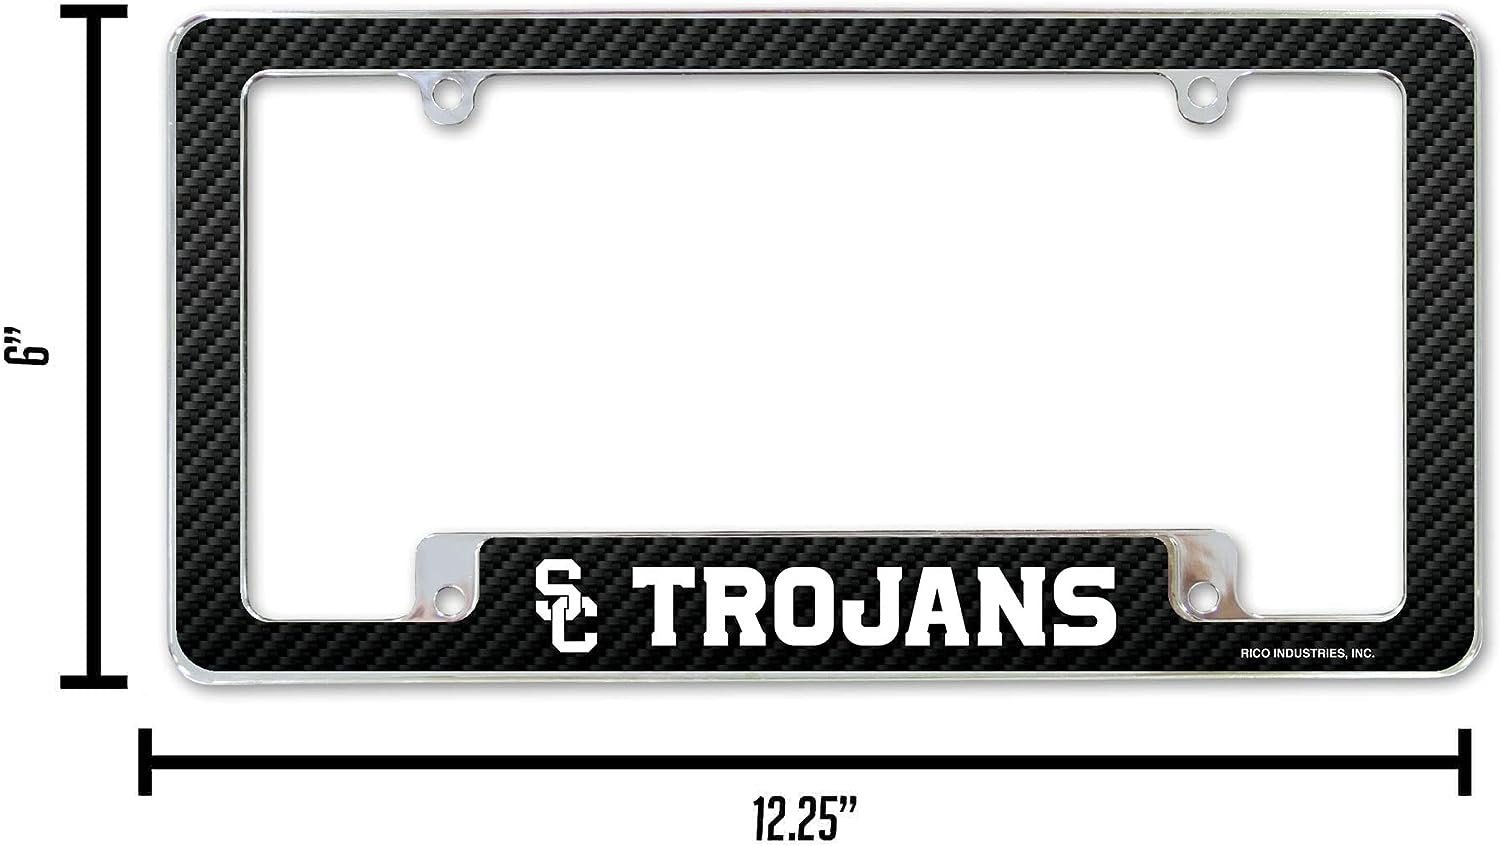 University of Southern California Trojans USC Metal License Plate Frame Chrome Tag Cover 12x6 Inch Carbon Fiber Design